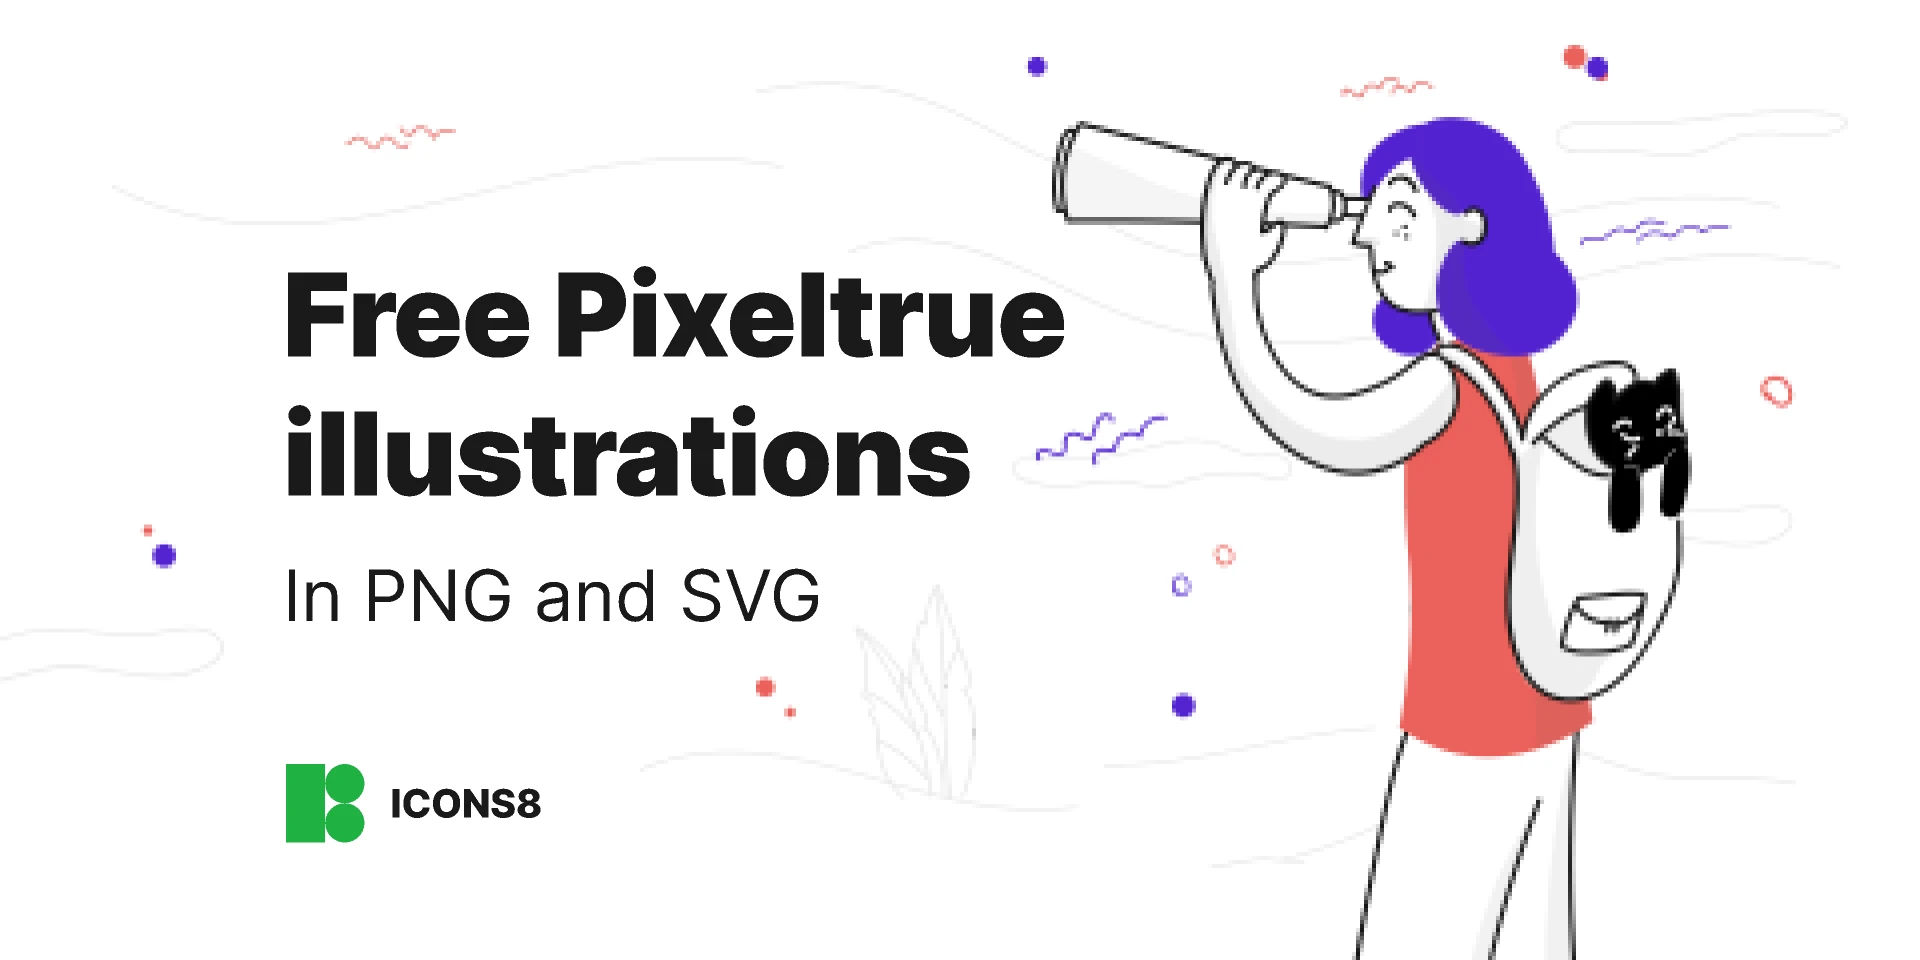 Free Pixeltrue illustrations in PNG and SVG for Figma and Adobe XD